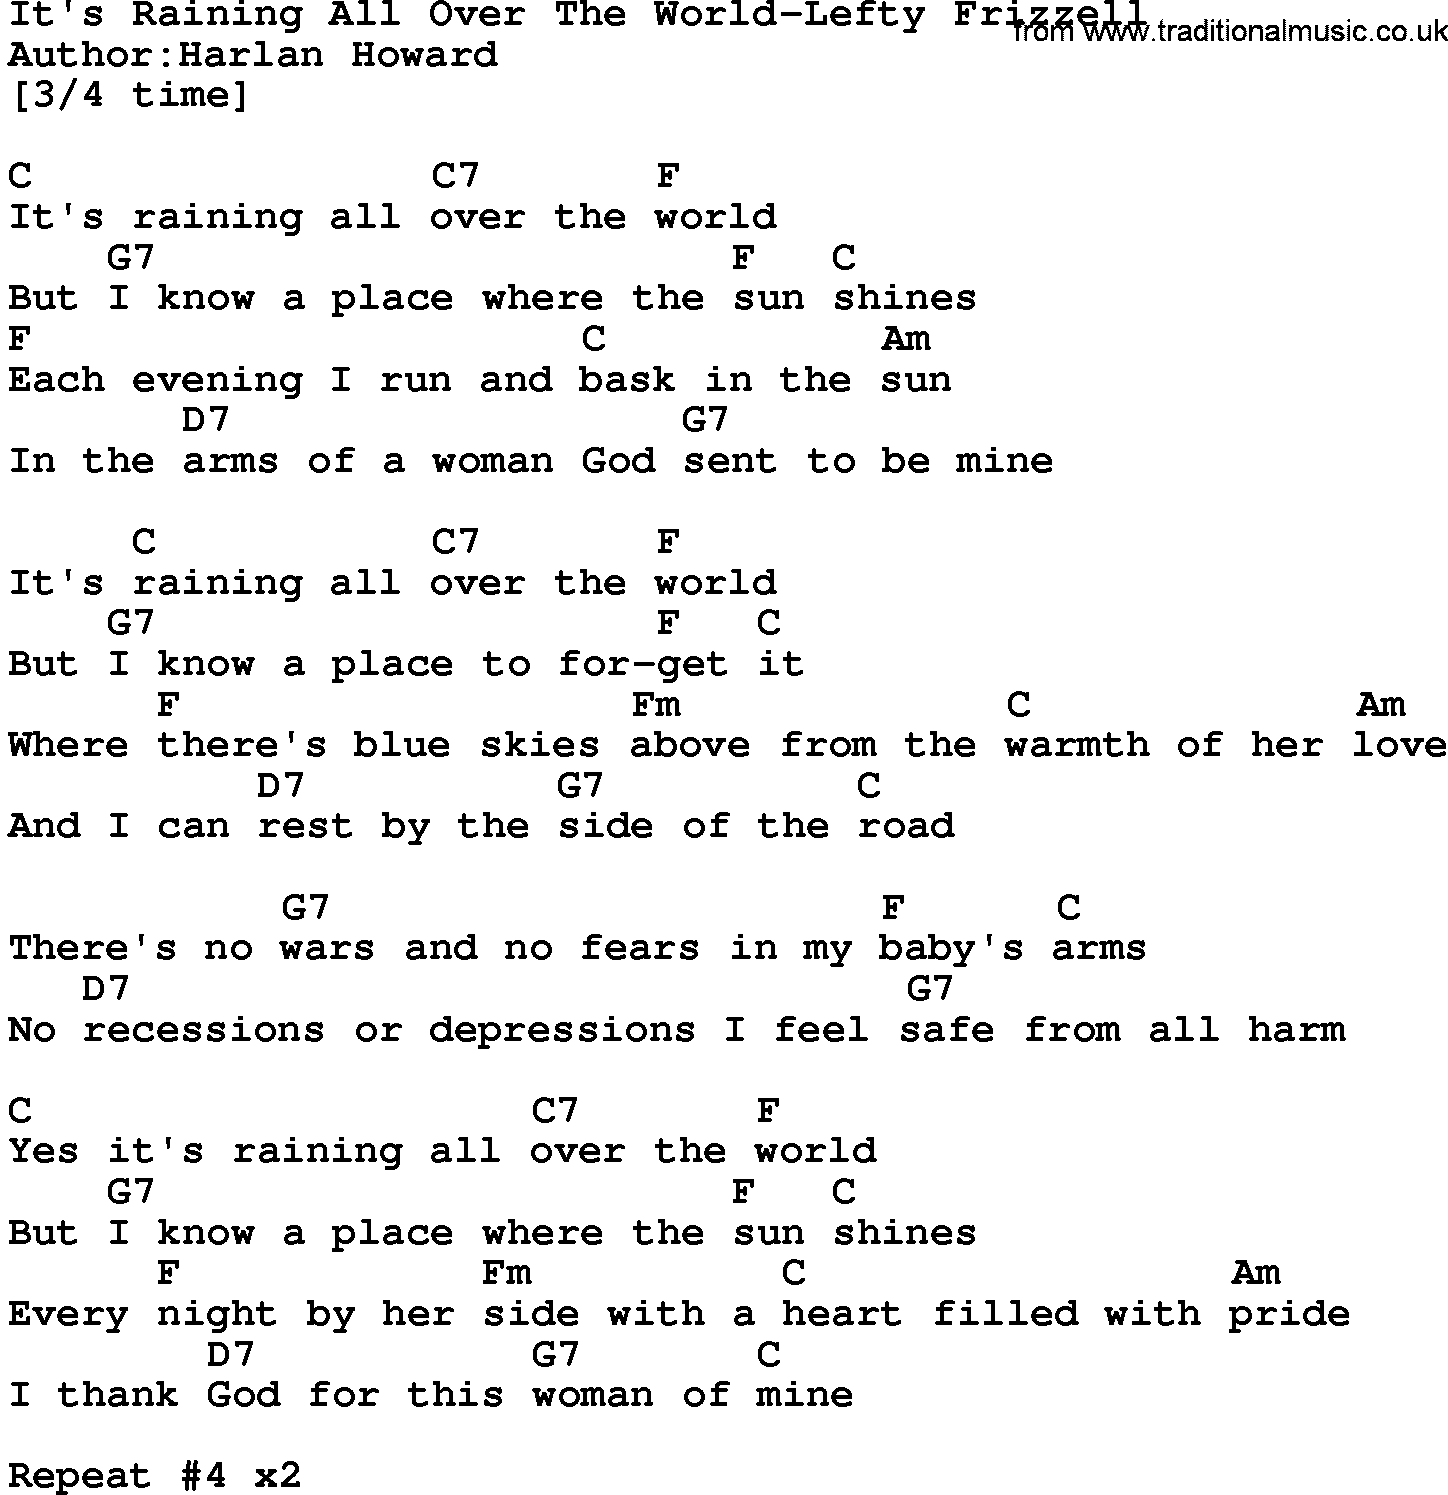 Country music song: It's Raining All Over The World-Lefty Frizzell lyrics and chords